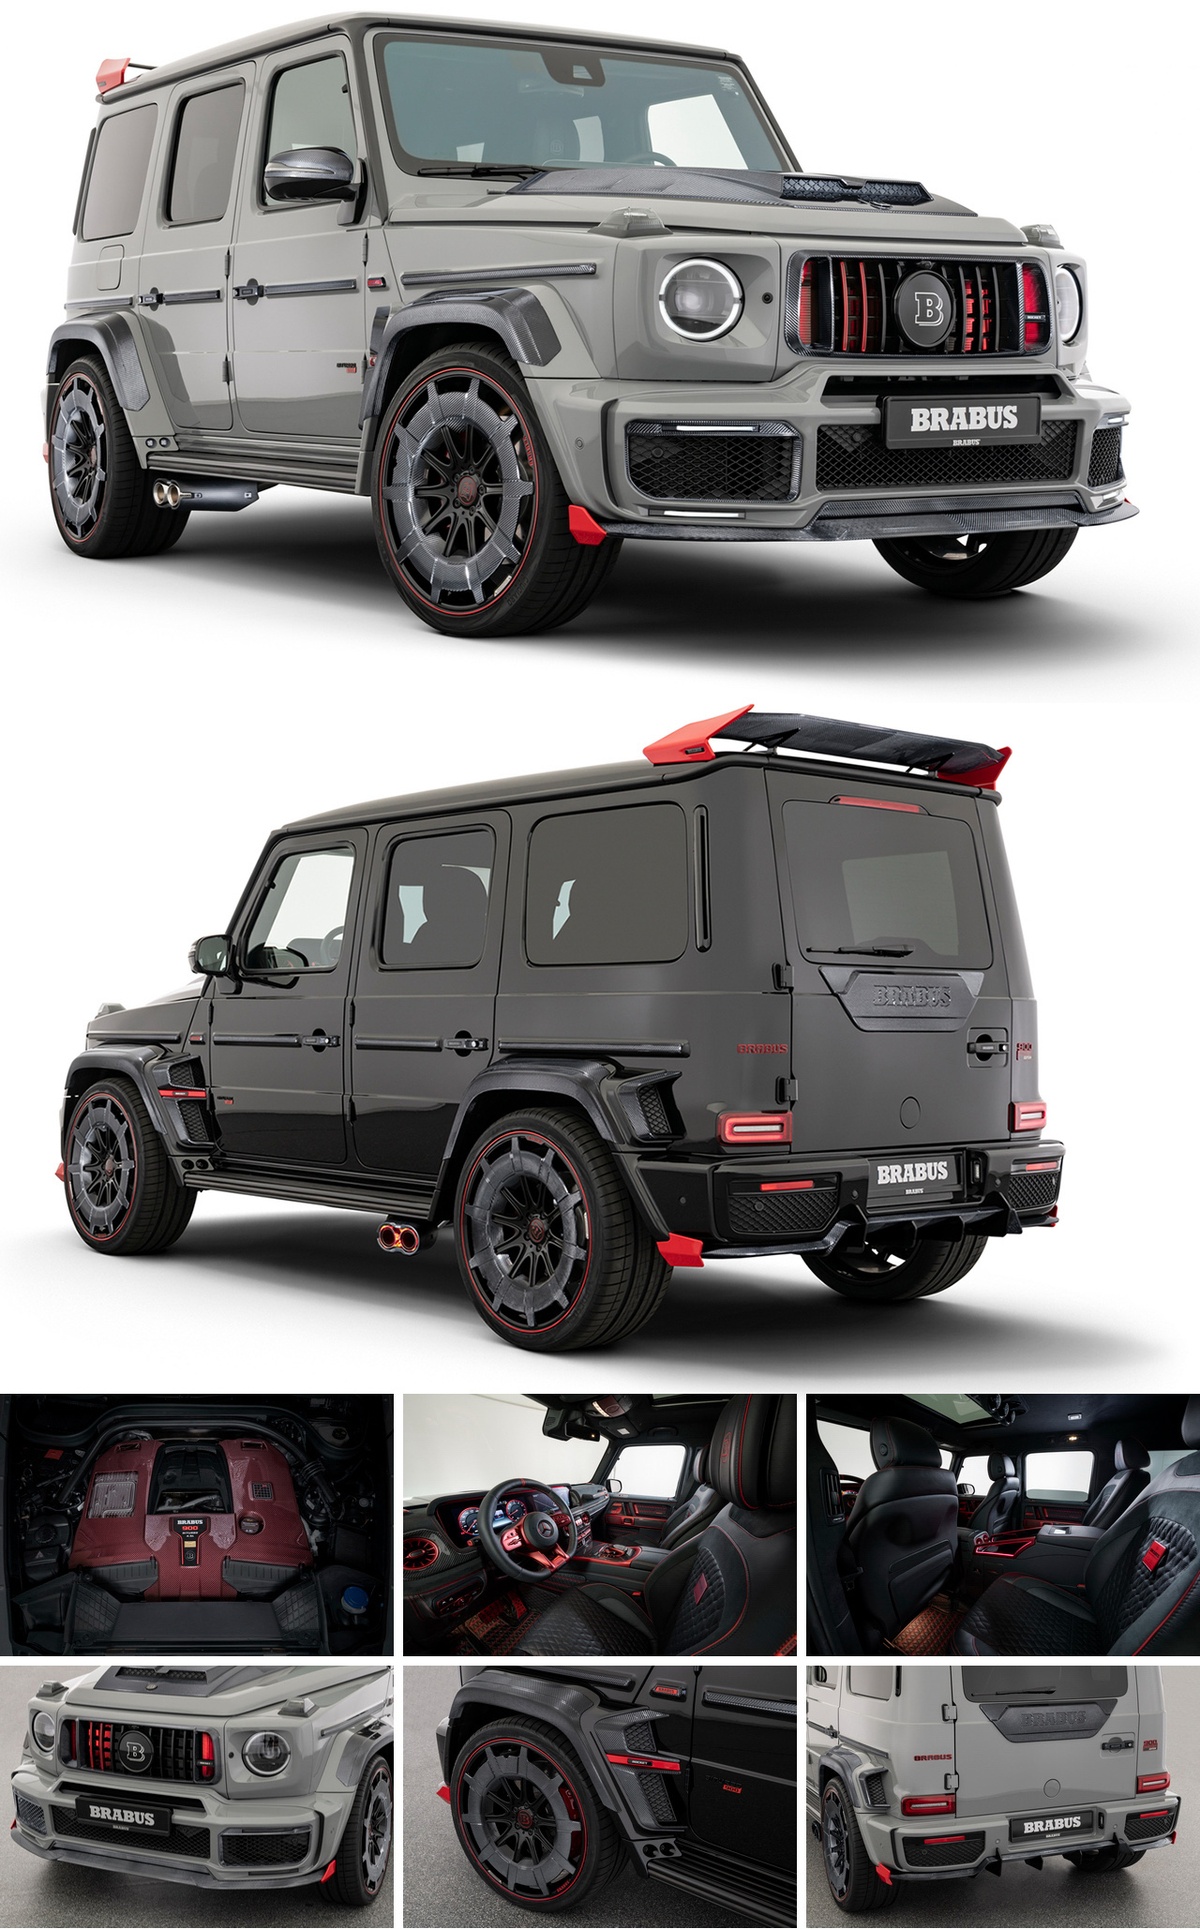 BRABUS 900 ROCKET EDITION – The new limited-edition supercar based on the G  63 